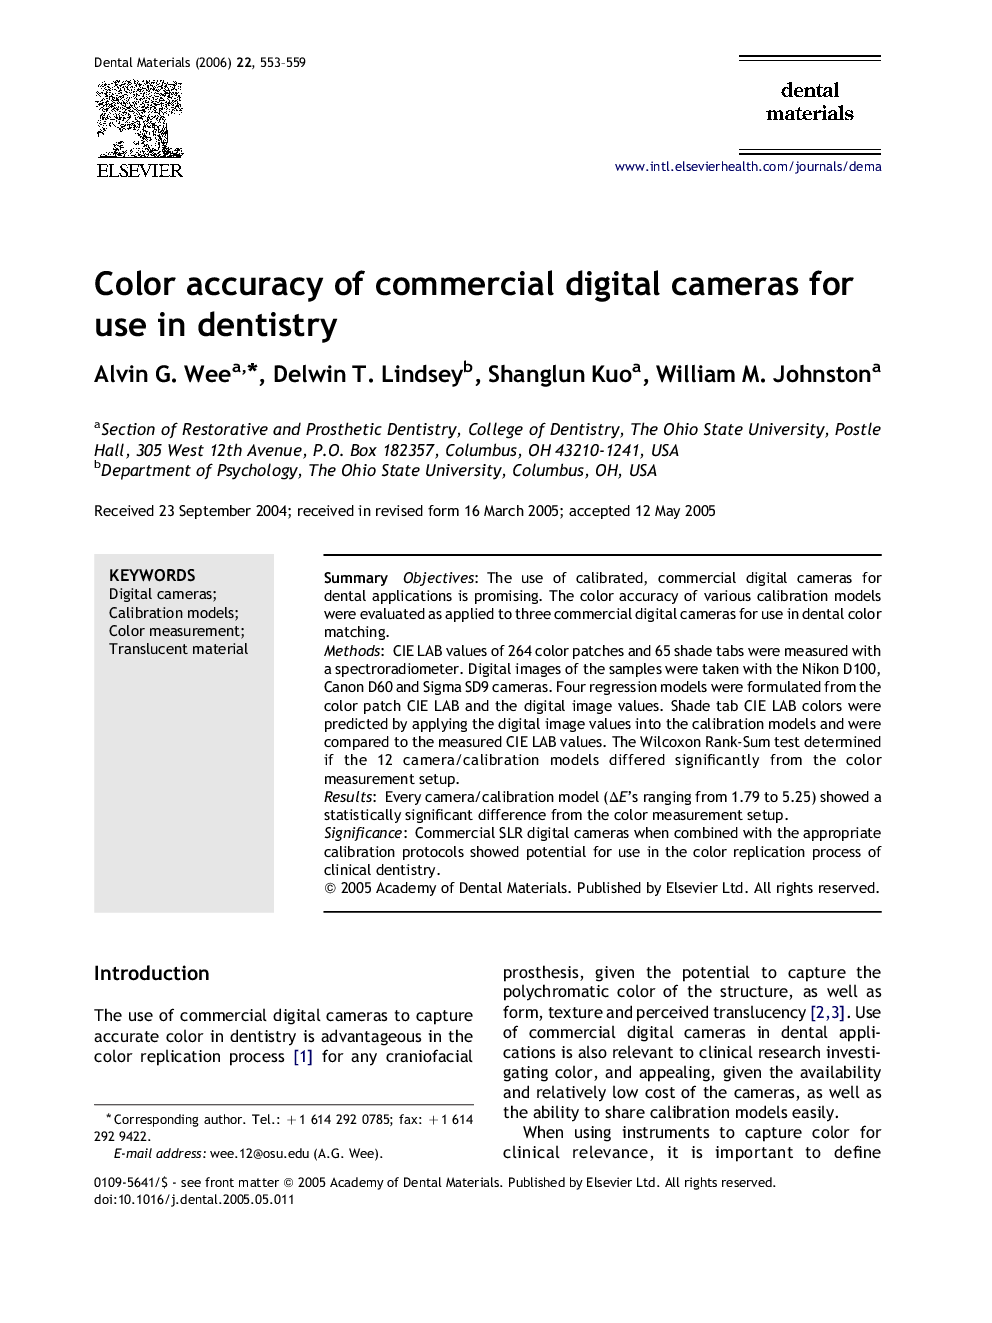 Color accuracy of commercial digital cameras for use in dentistry